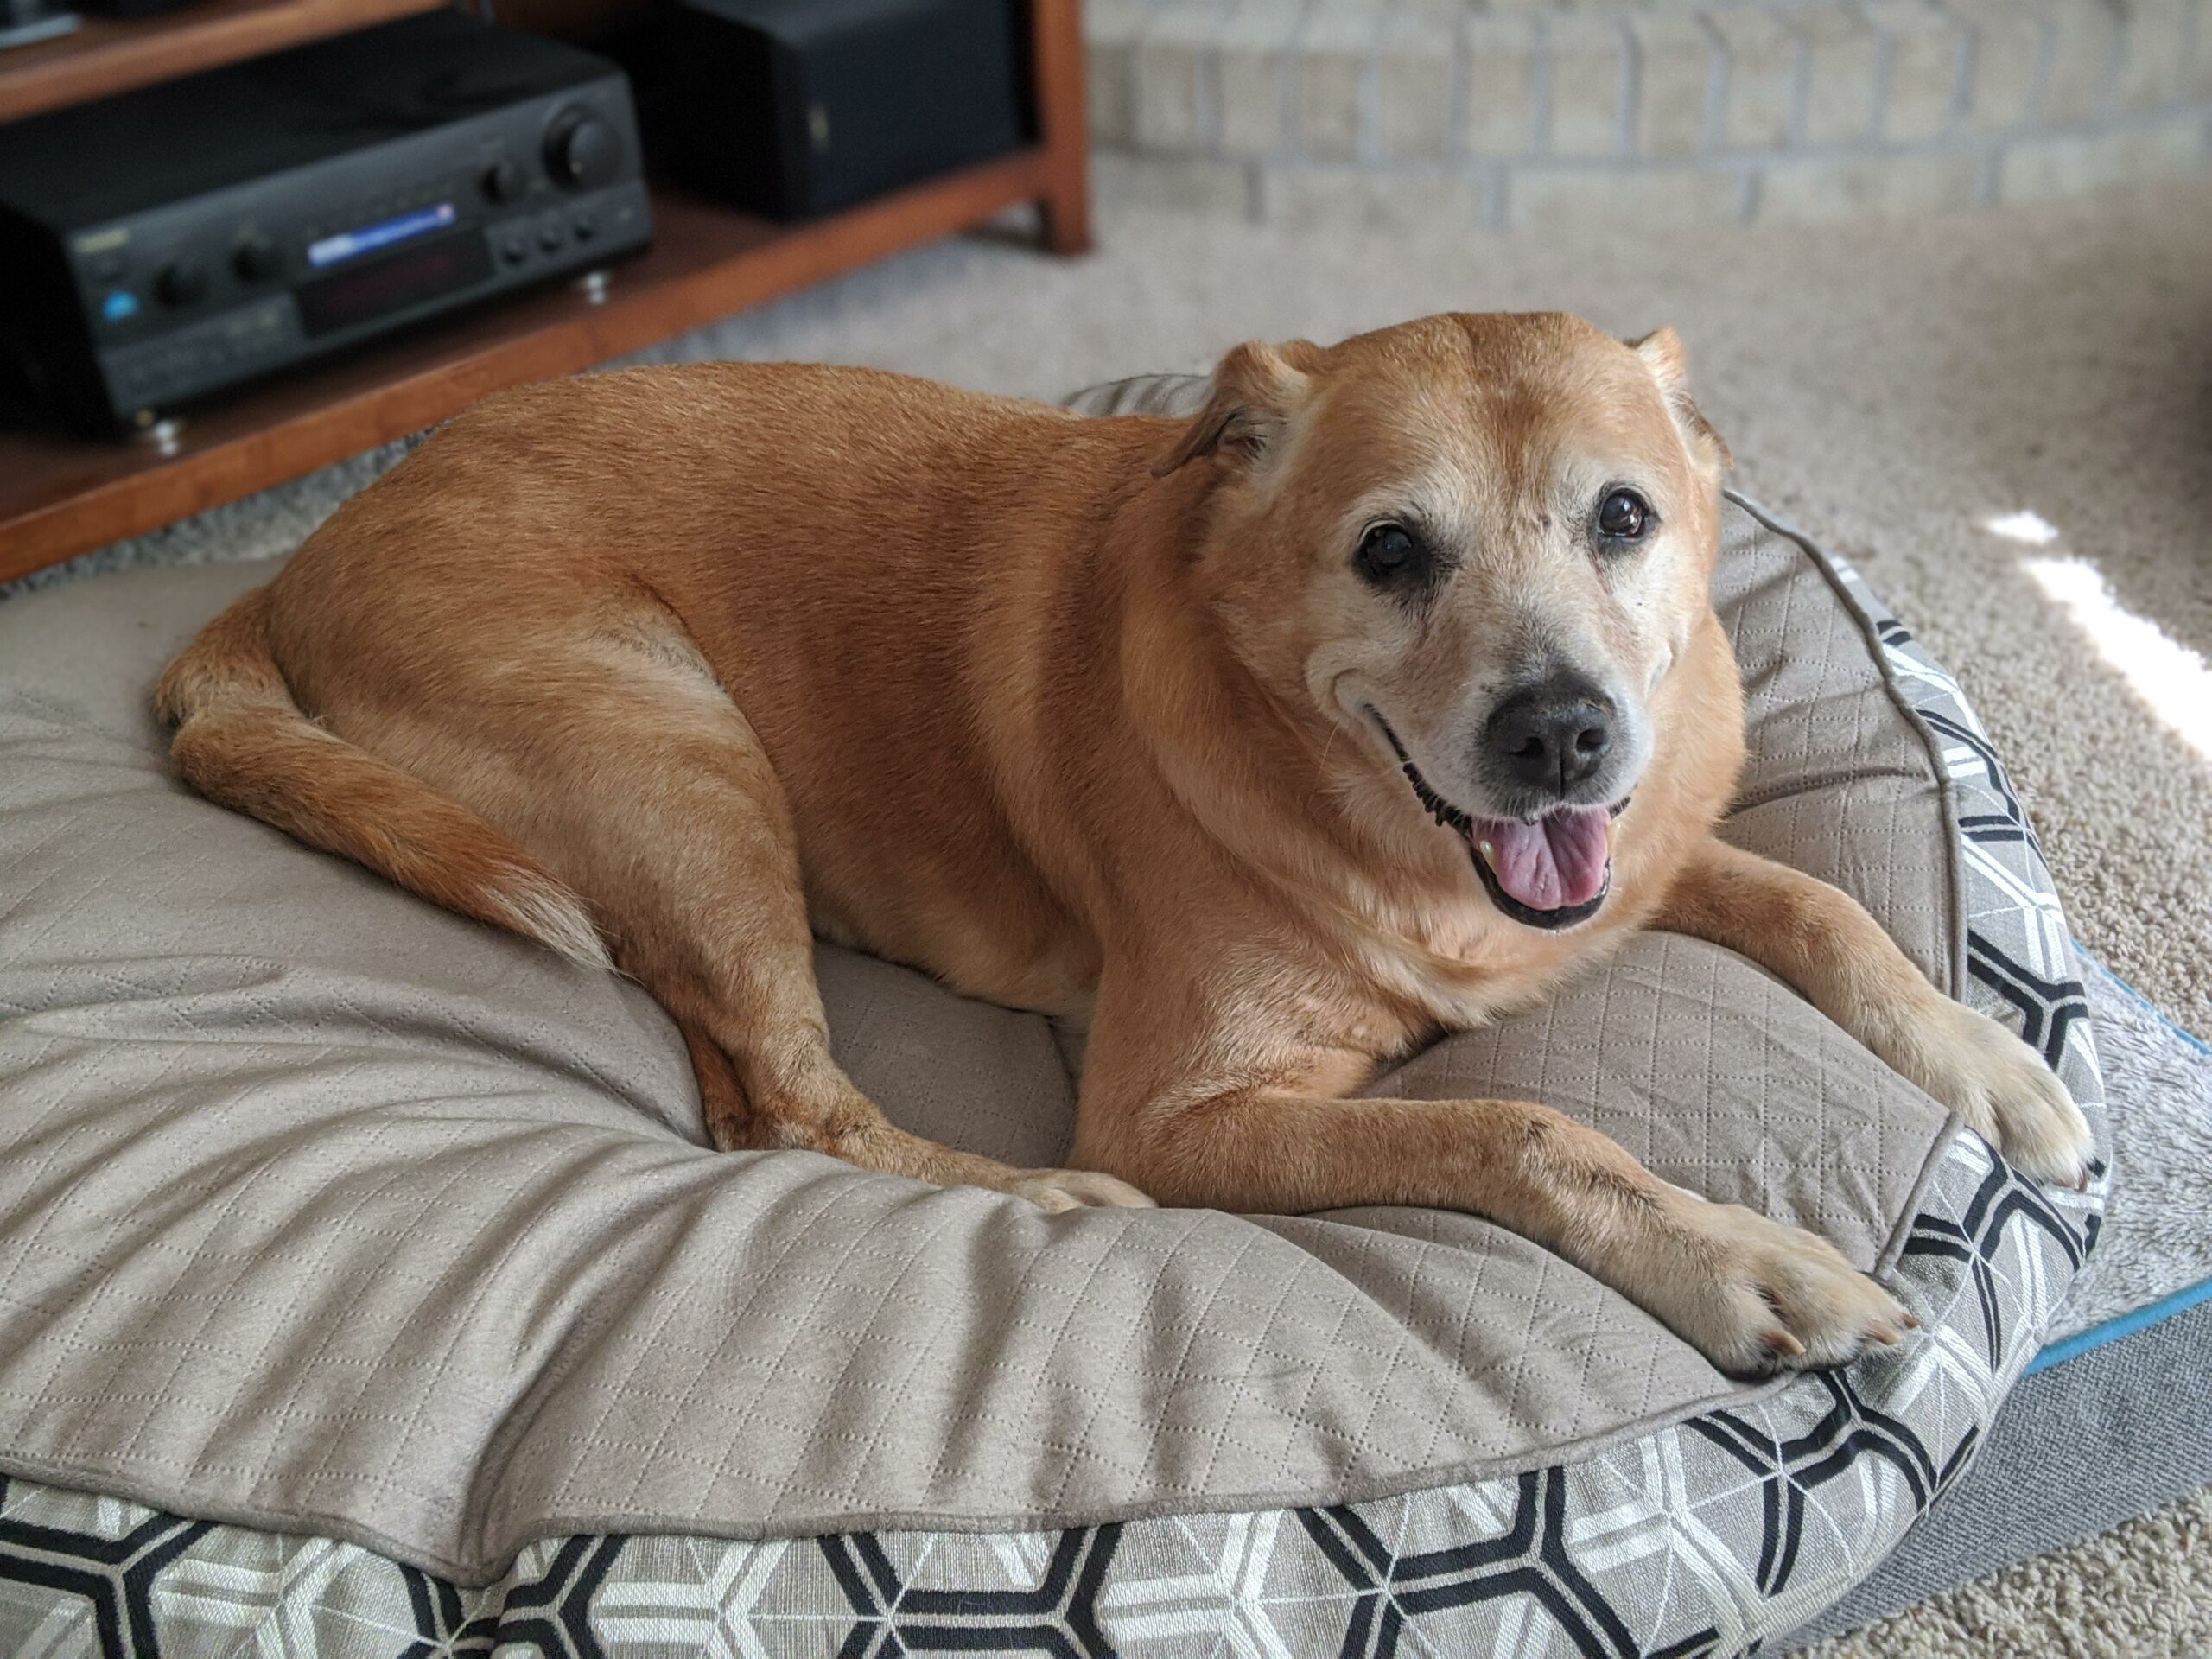 A large brown dog smiles as she lays on a dog bed.